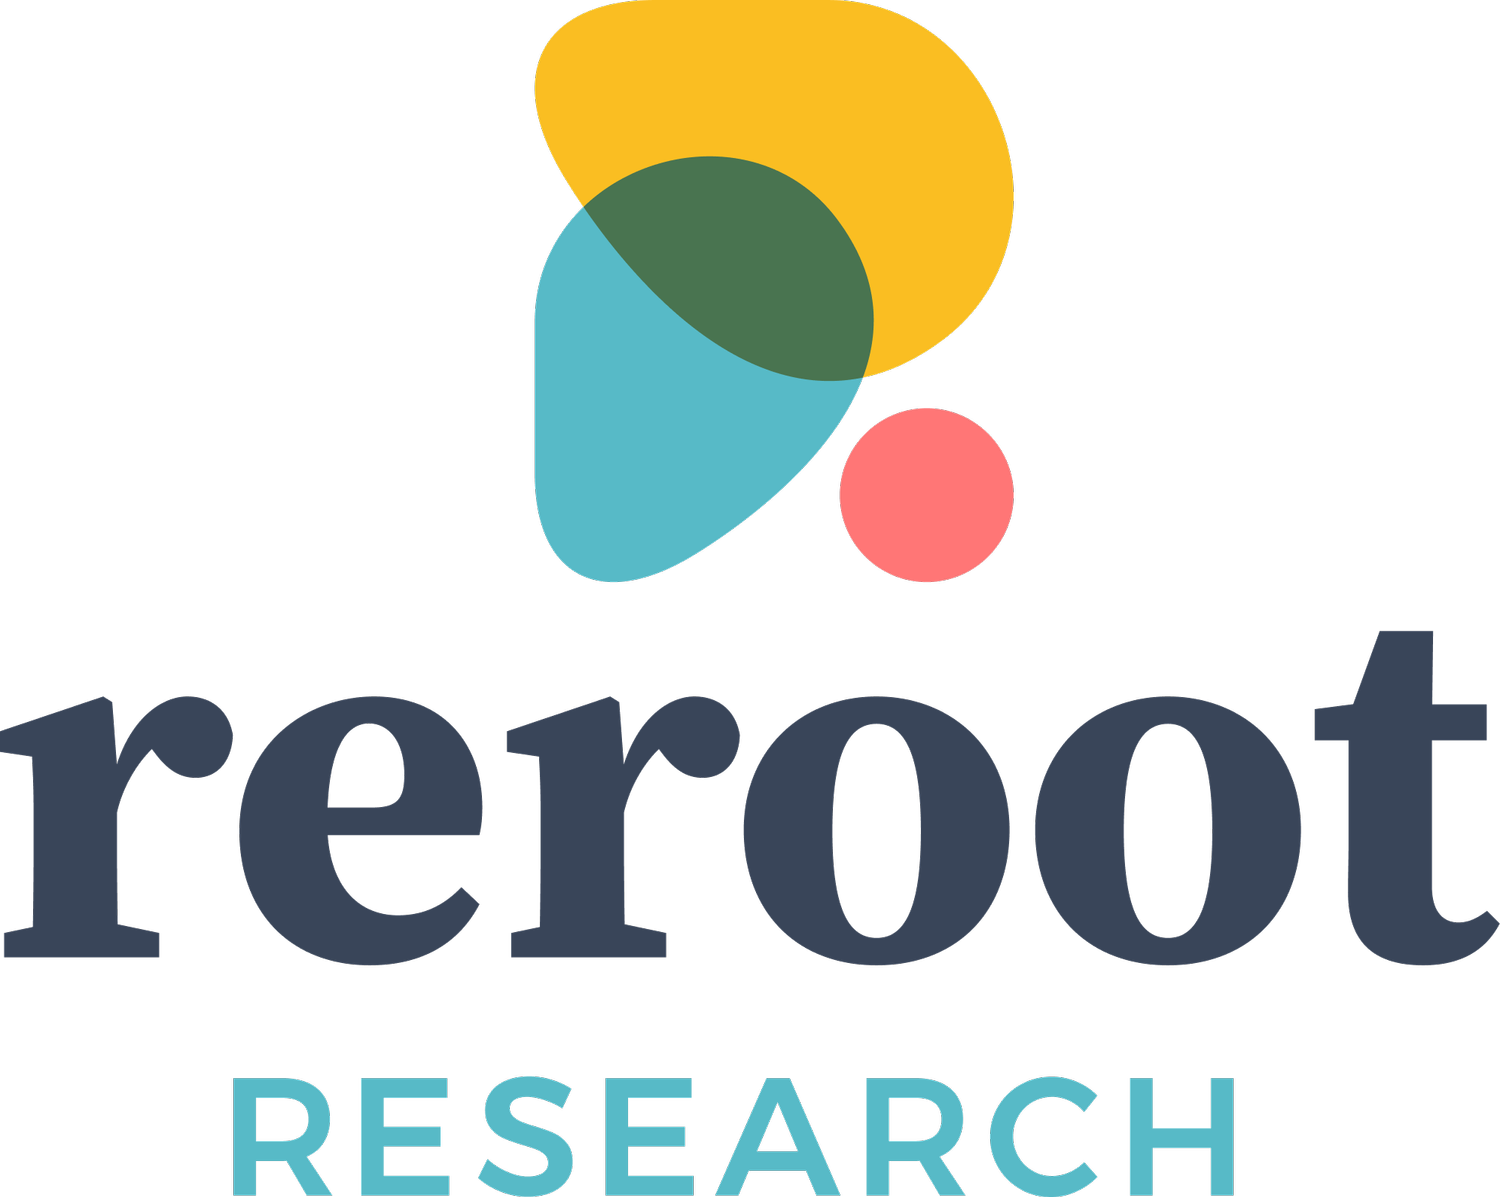 rerootresearch